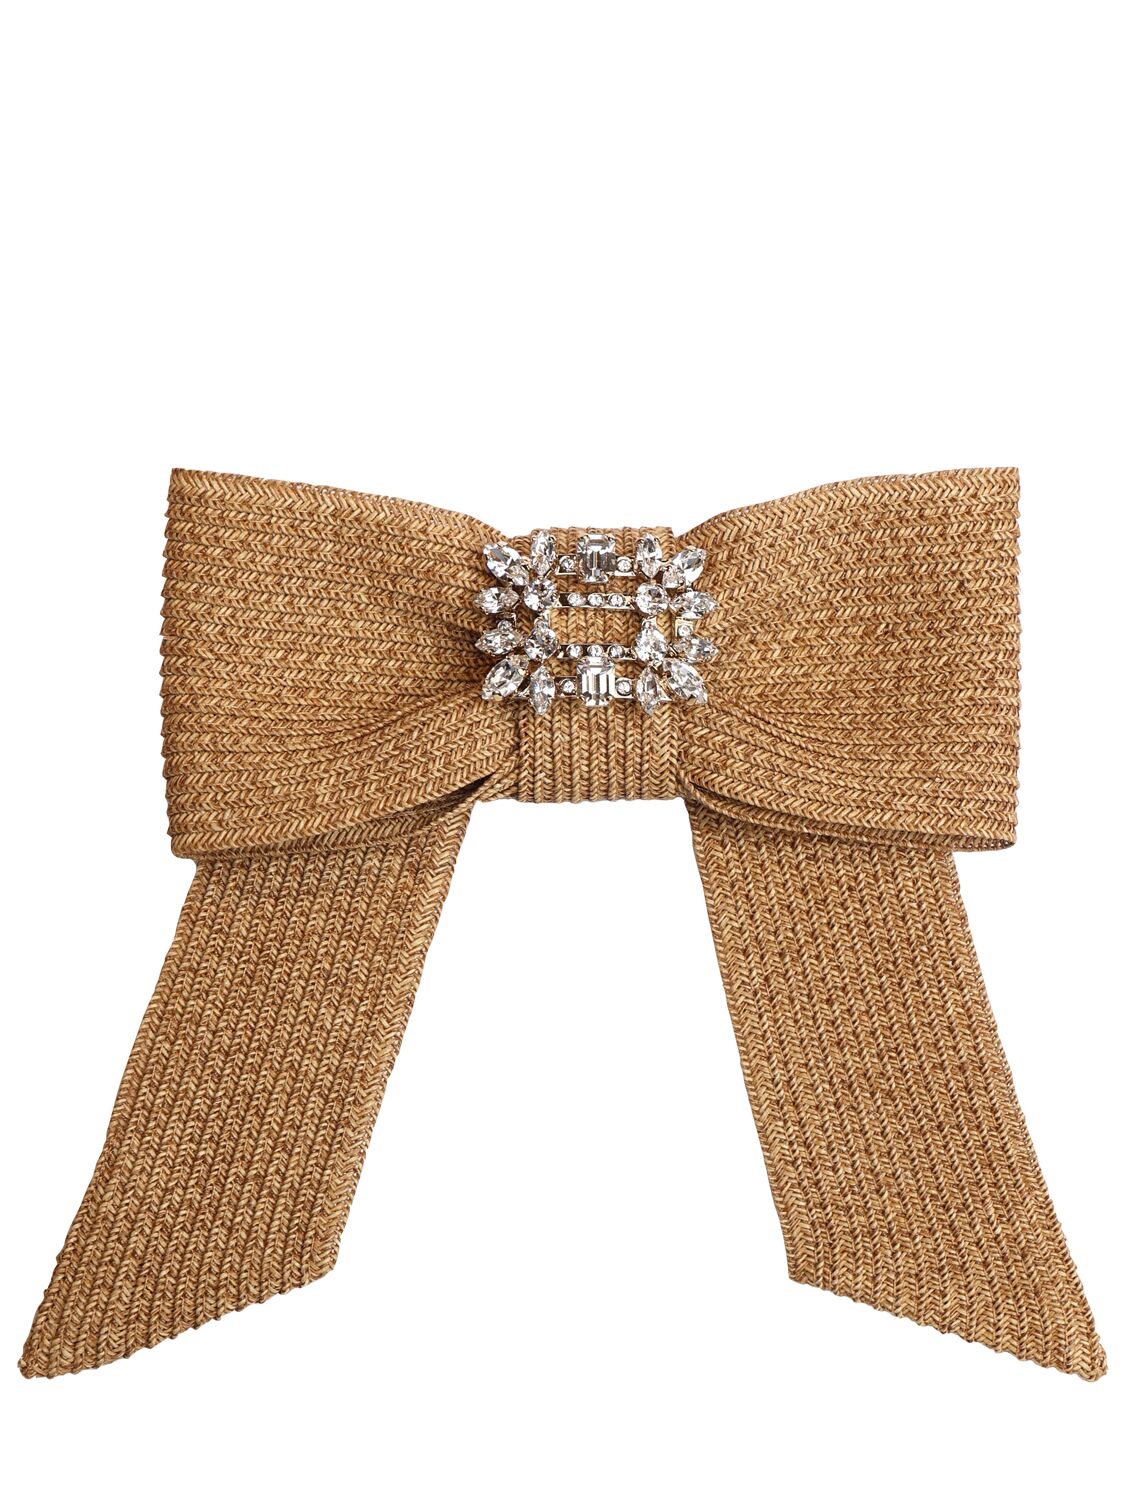 Image of Rv Broche Bow Hair Clip